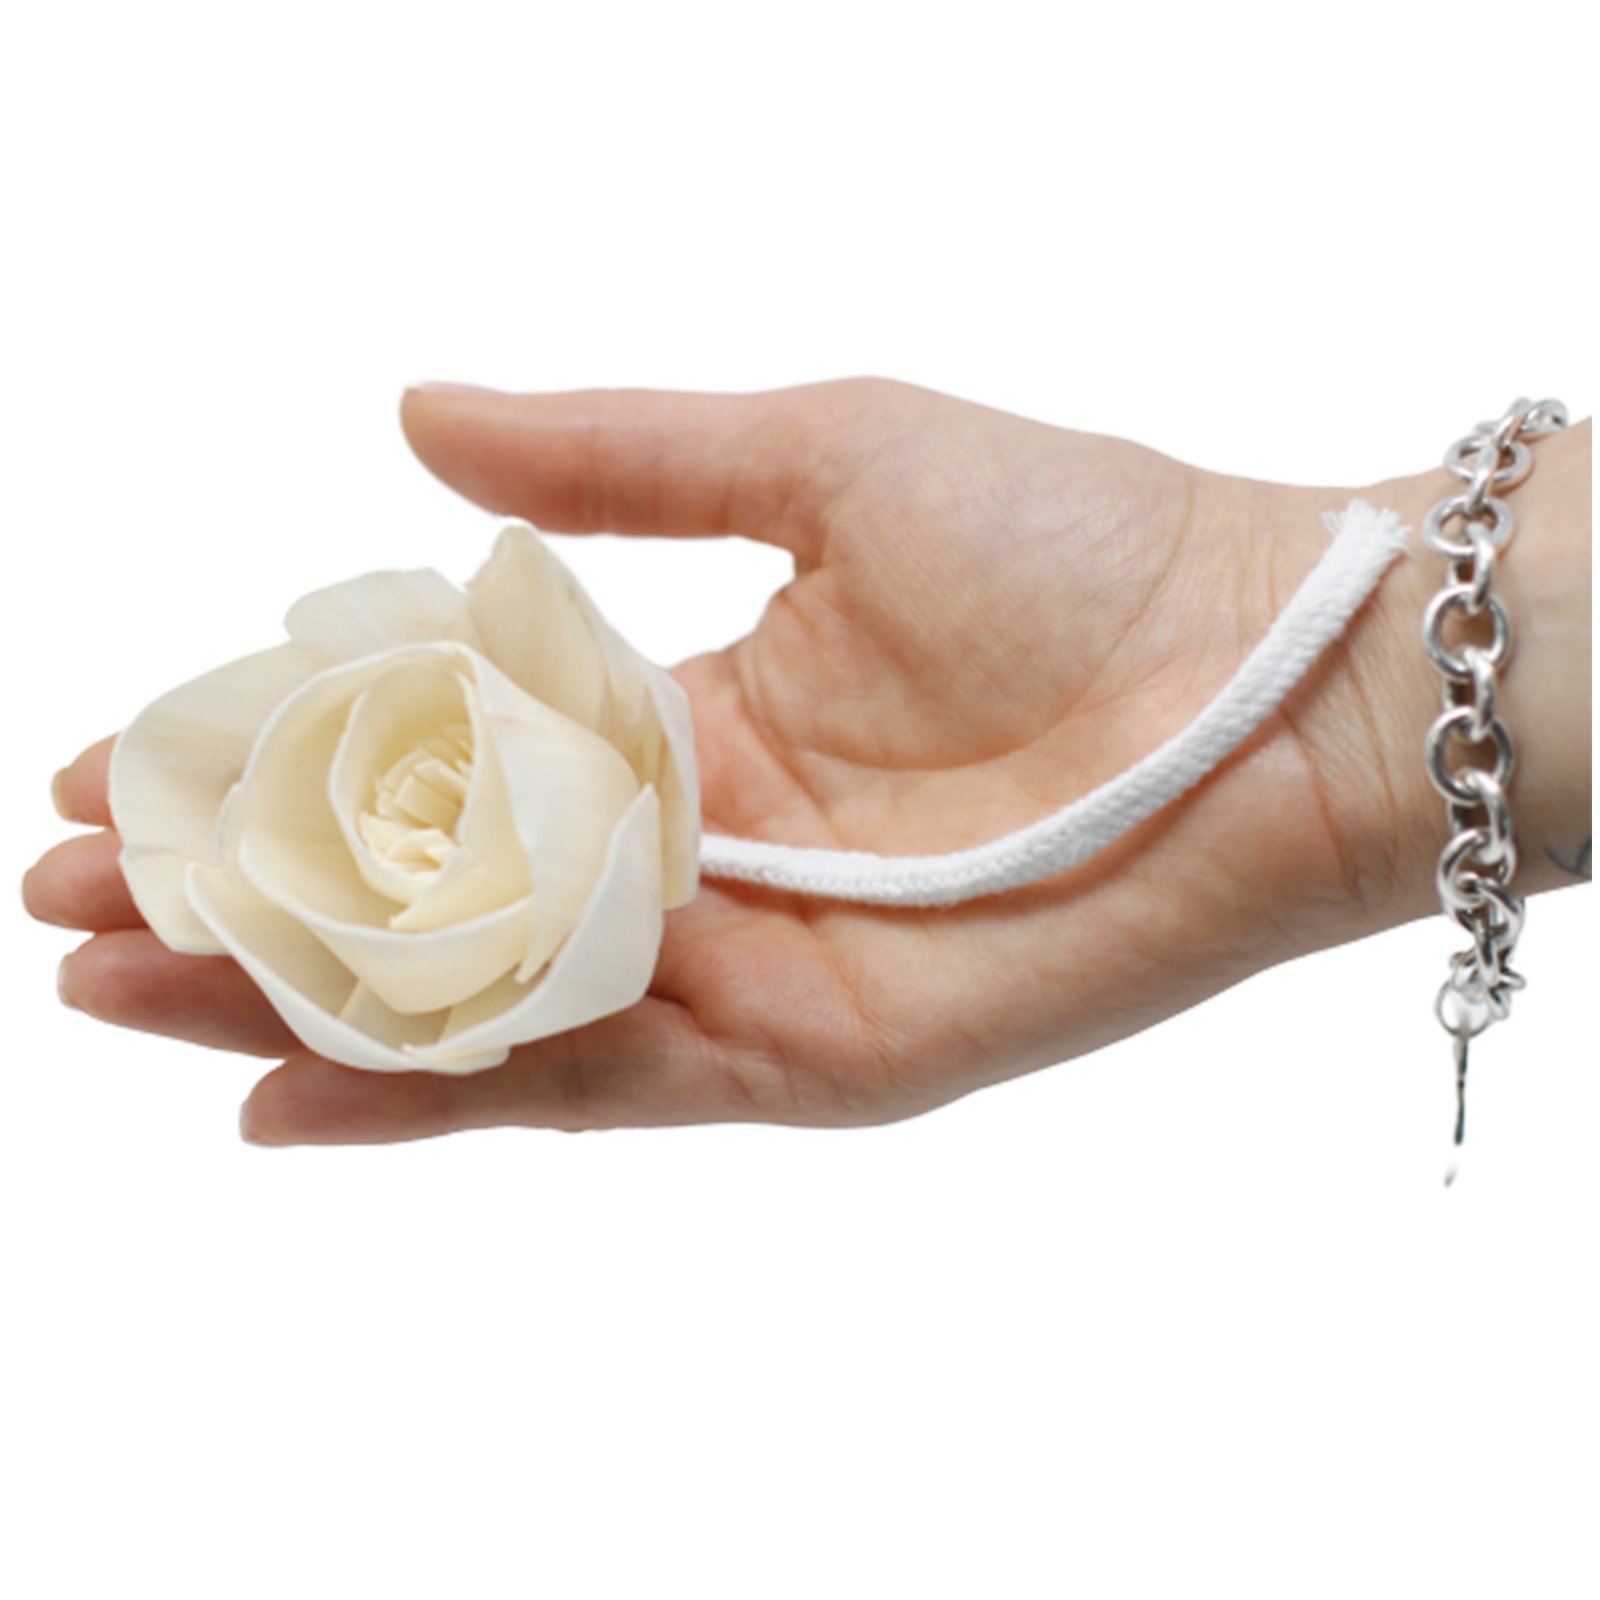 Natural Diffuser Flowers - Large Rose on String